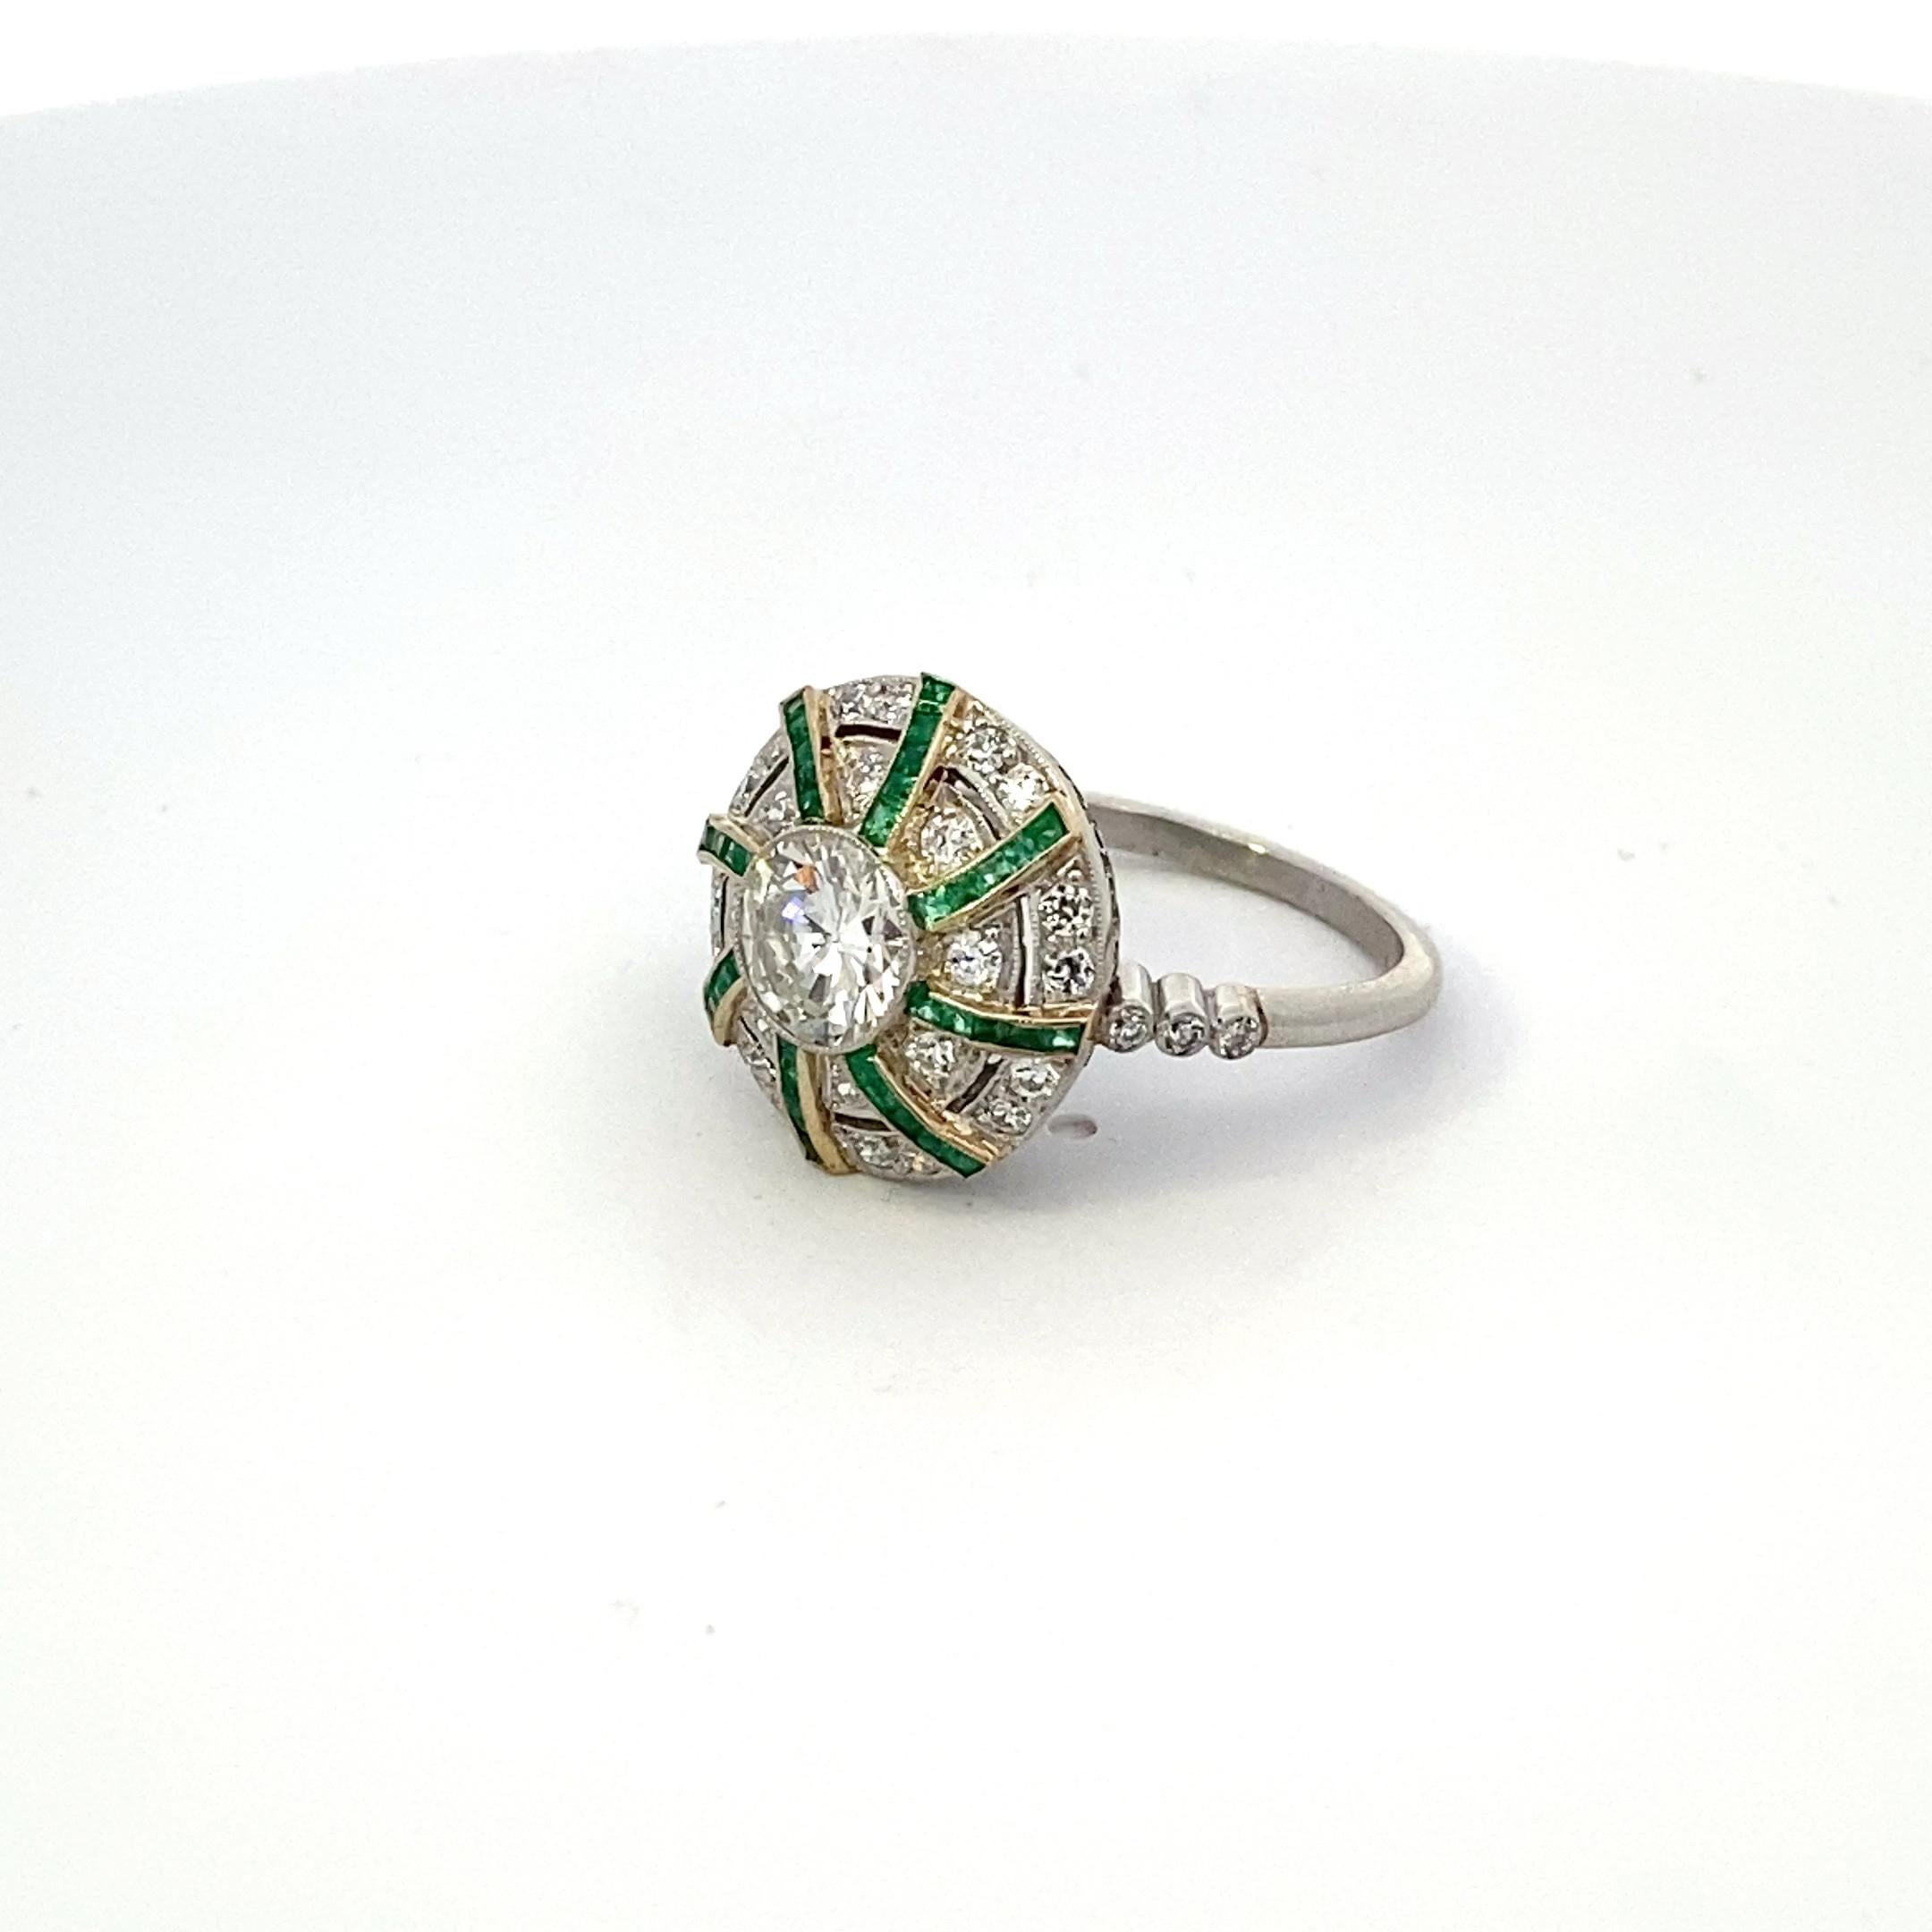 Art Deco 1.04 Carat Old Euro Cut Diamond and Emerald Ring For Sale 1